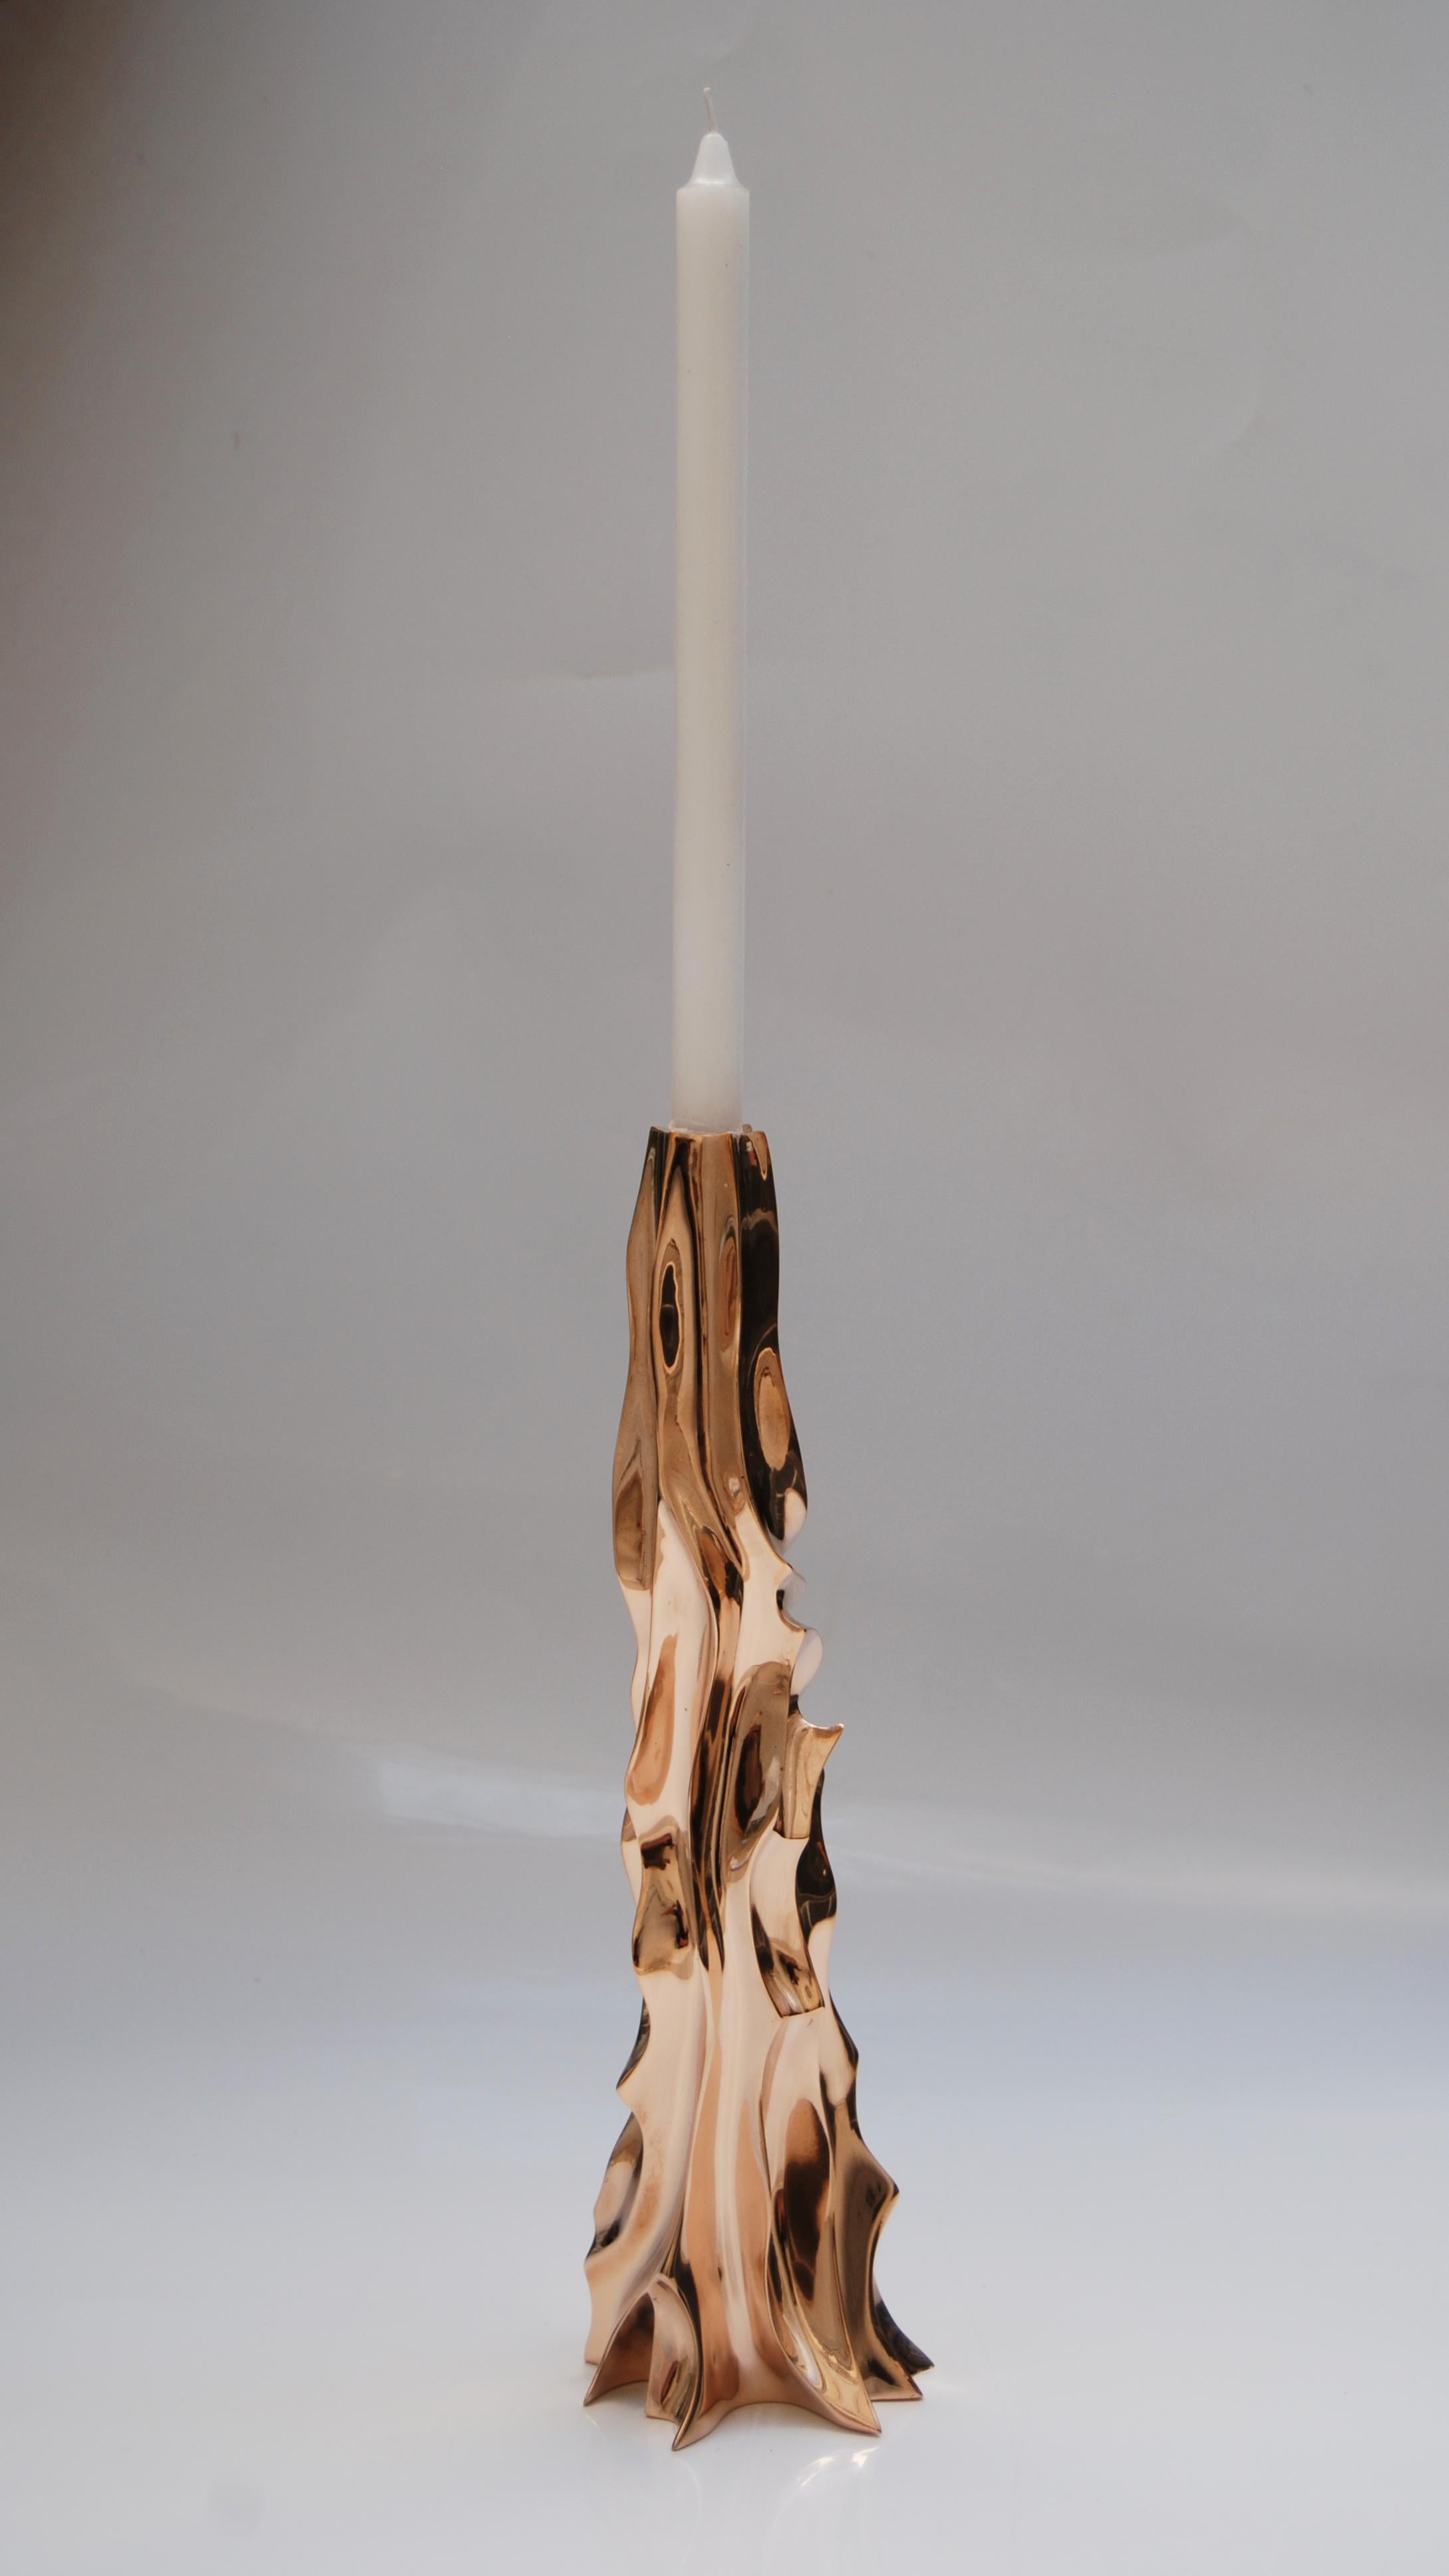 Candleholder in Polished Bronze by FAKASAKA Design
Dimensions: W 13.5 x D 13.5 x H 41.5 cm
Materials: Polished bronze.
  